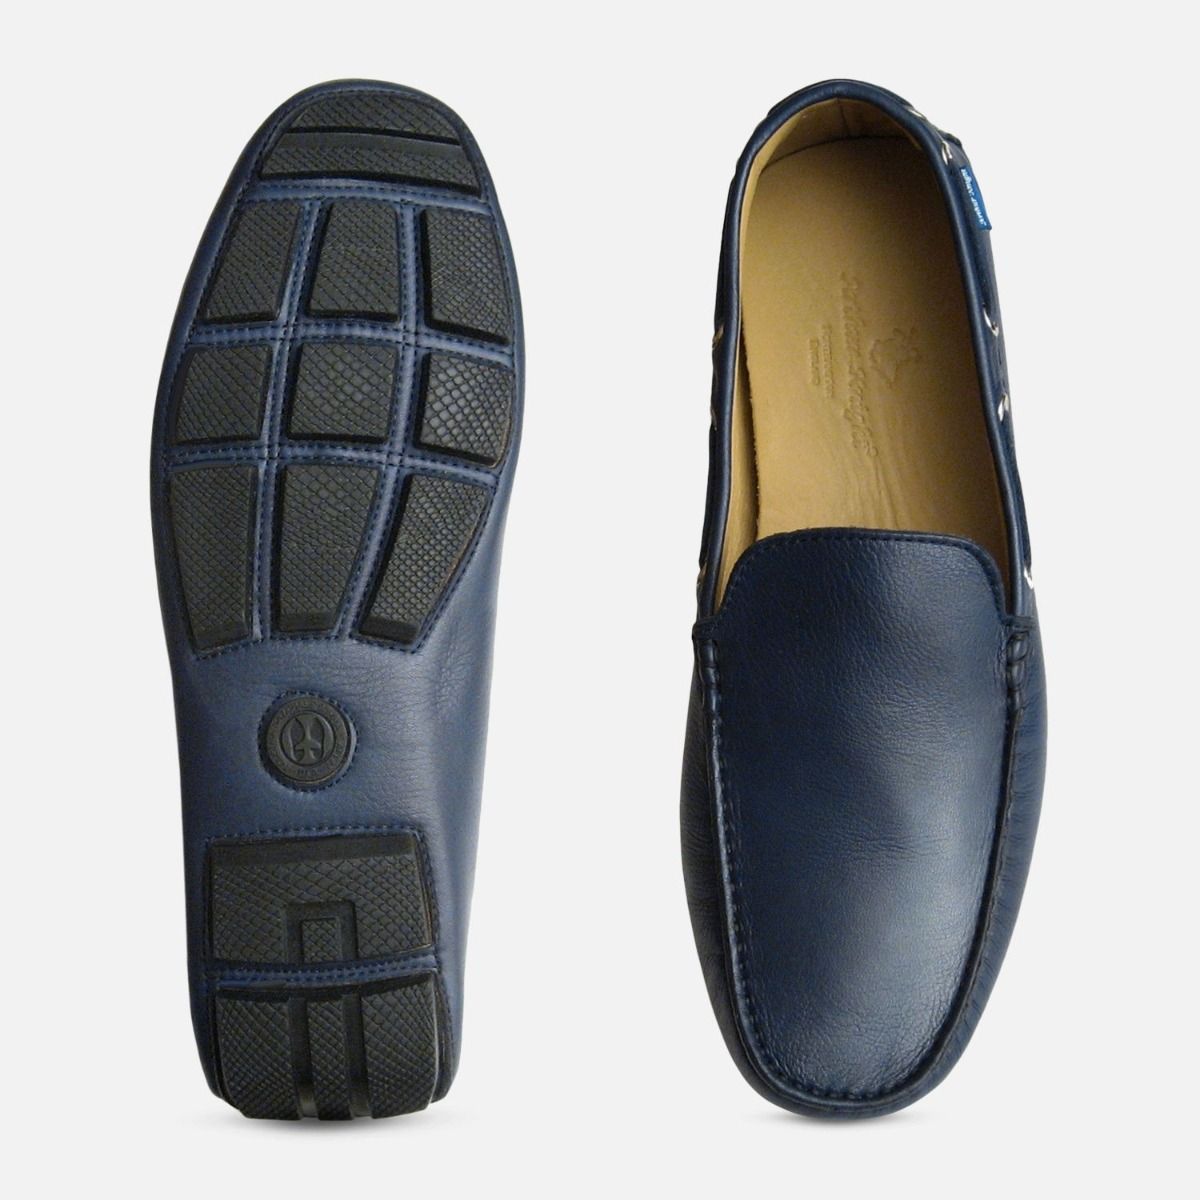 mens blue leather shoes uk